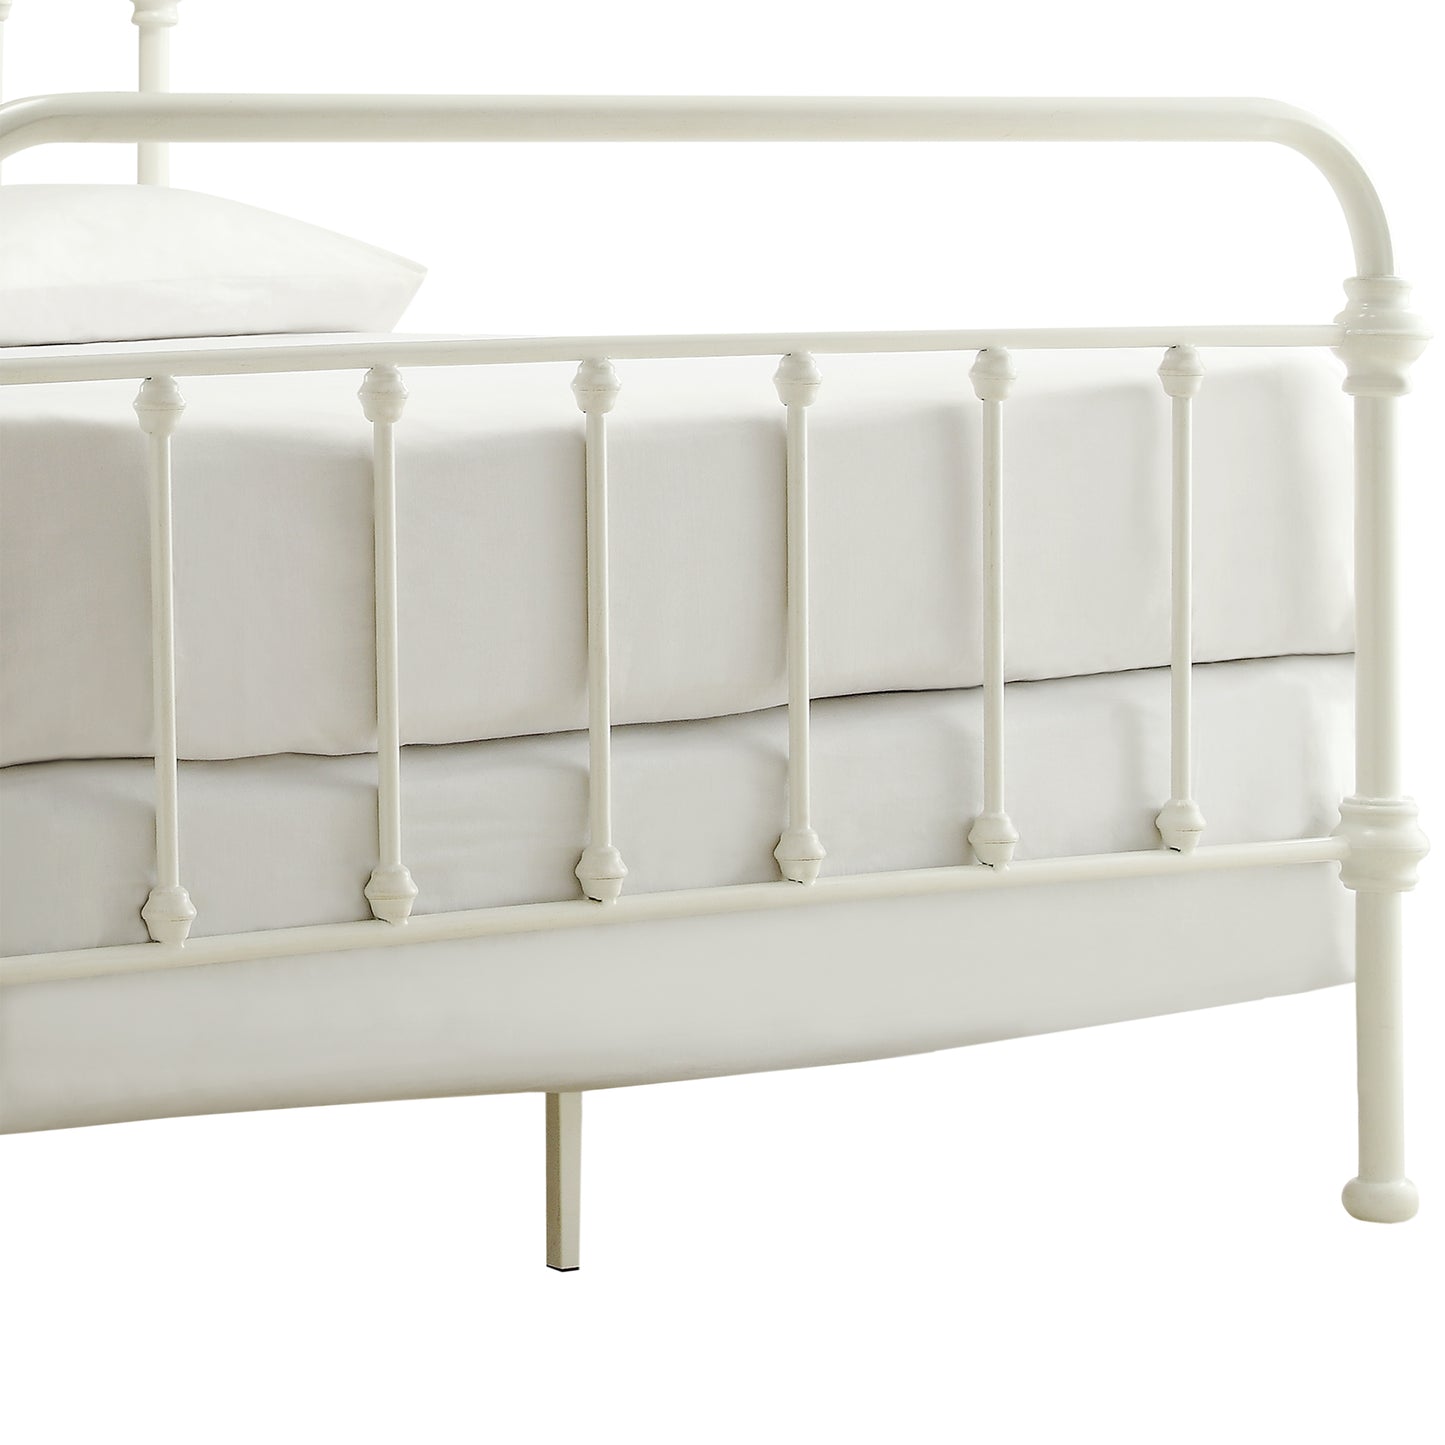 Antique Graceful Victorian Iron Metal Bed - Antique White, Full (Full Size)